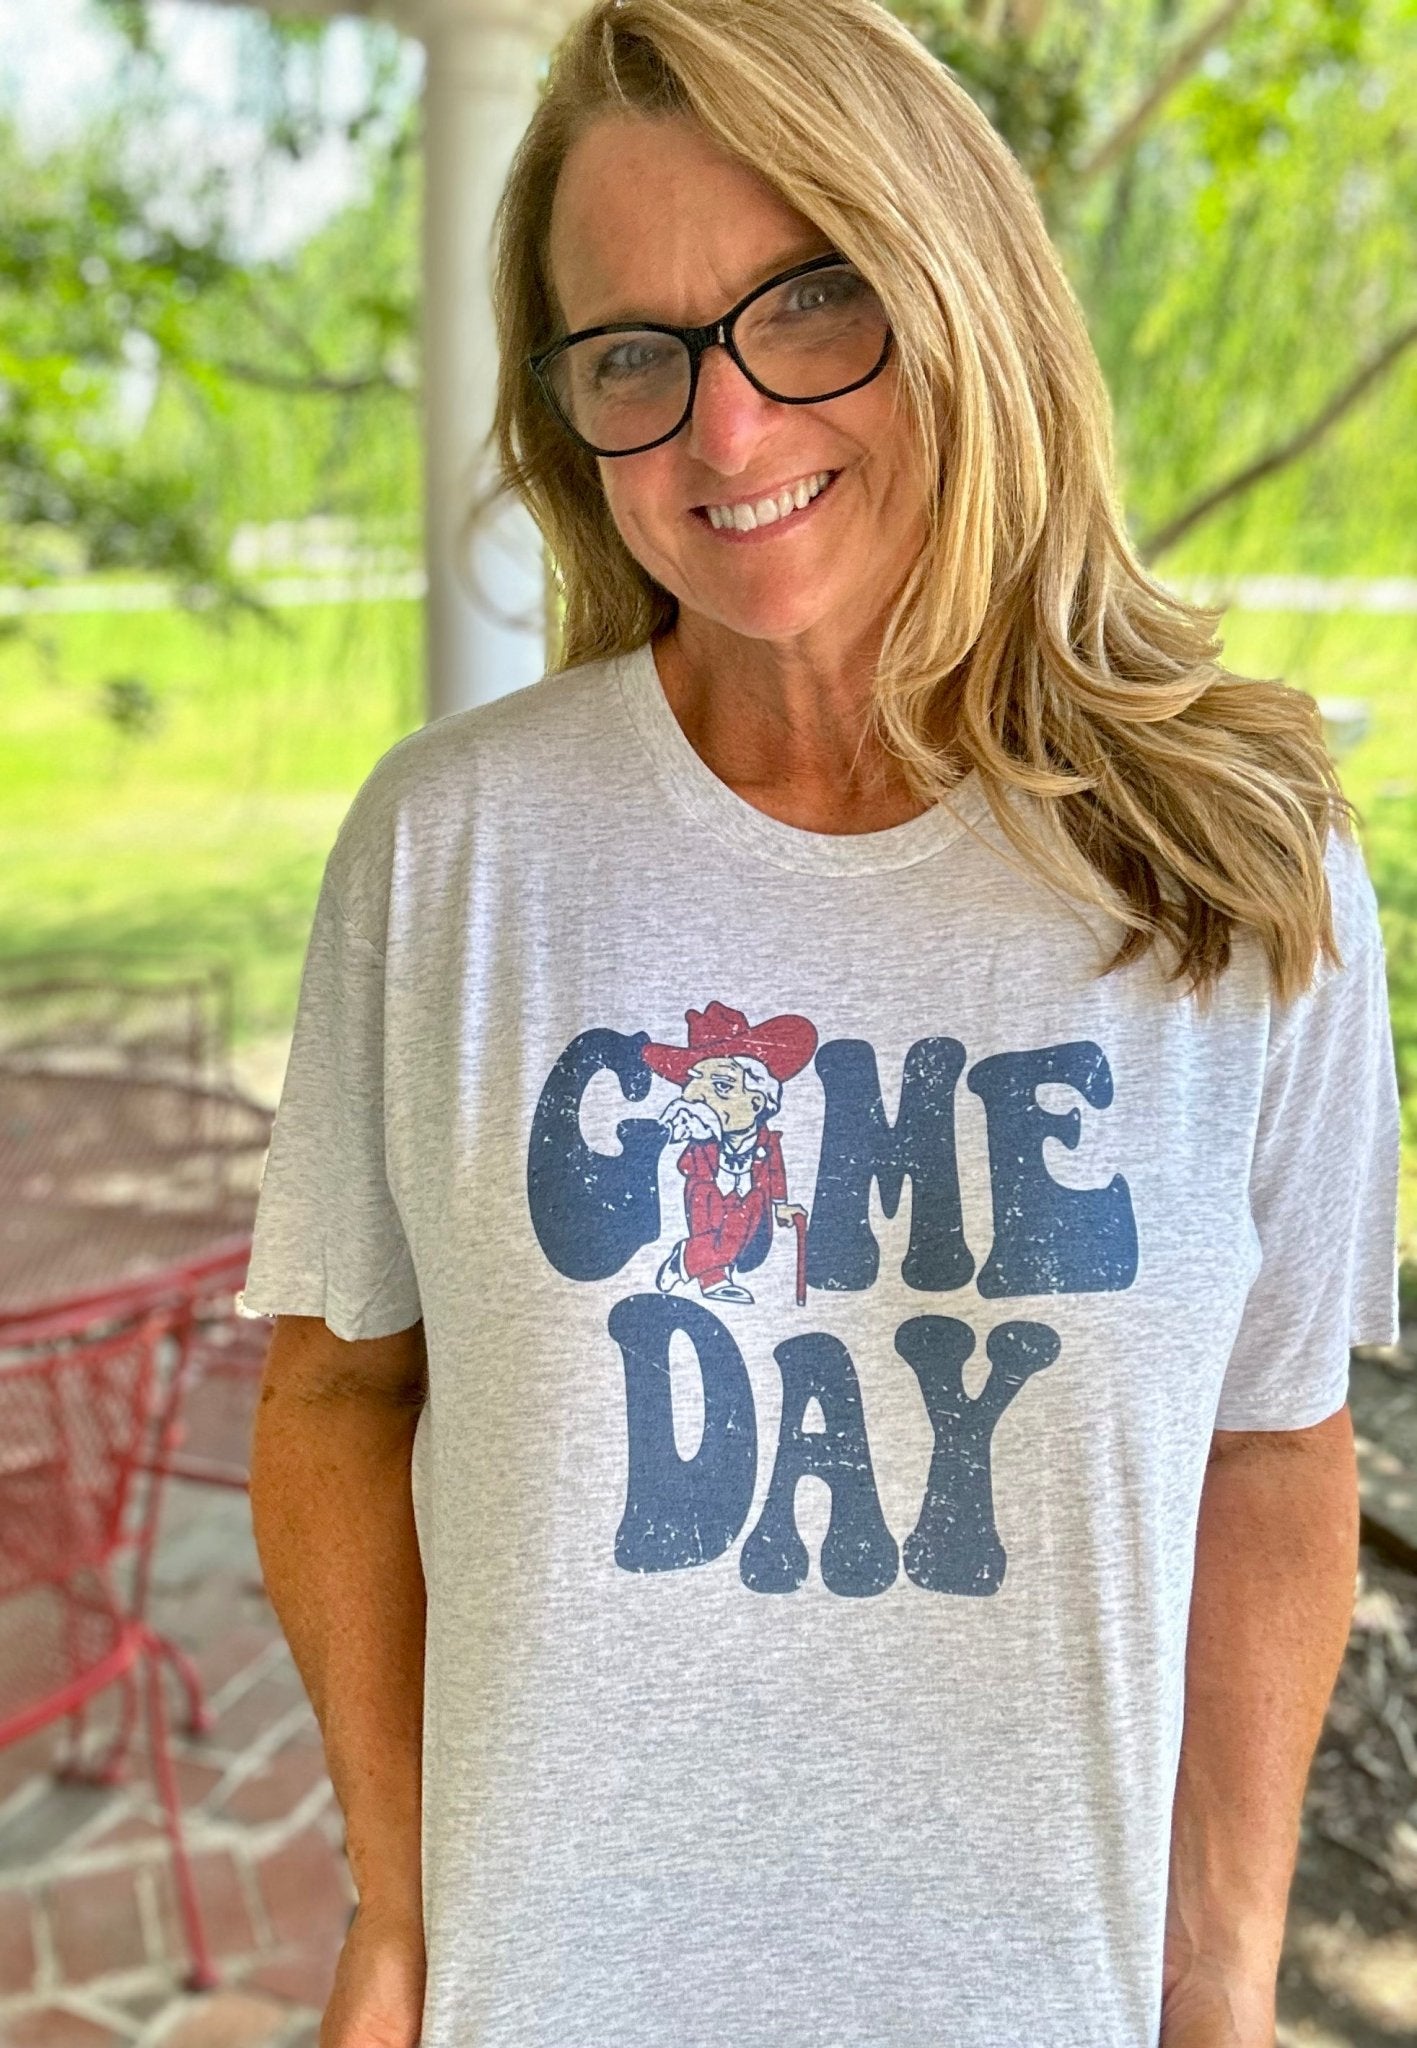 Rebels Game Day Graphic Tee or Sweatshirt - Graphic Tee - Jimberly's Boutique